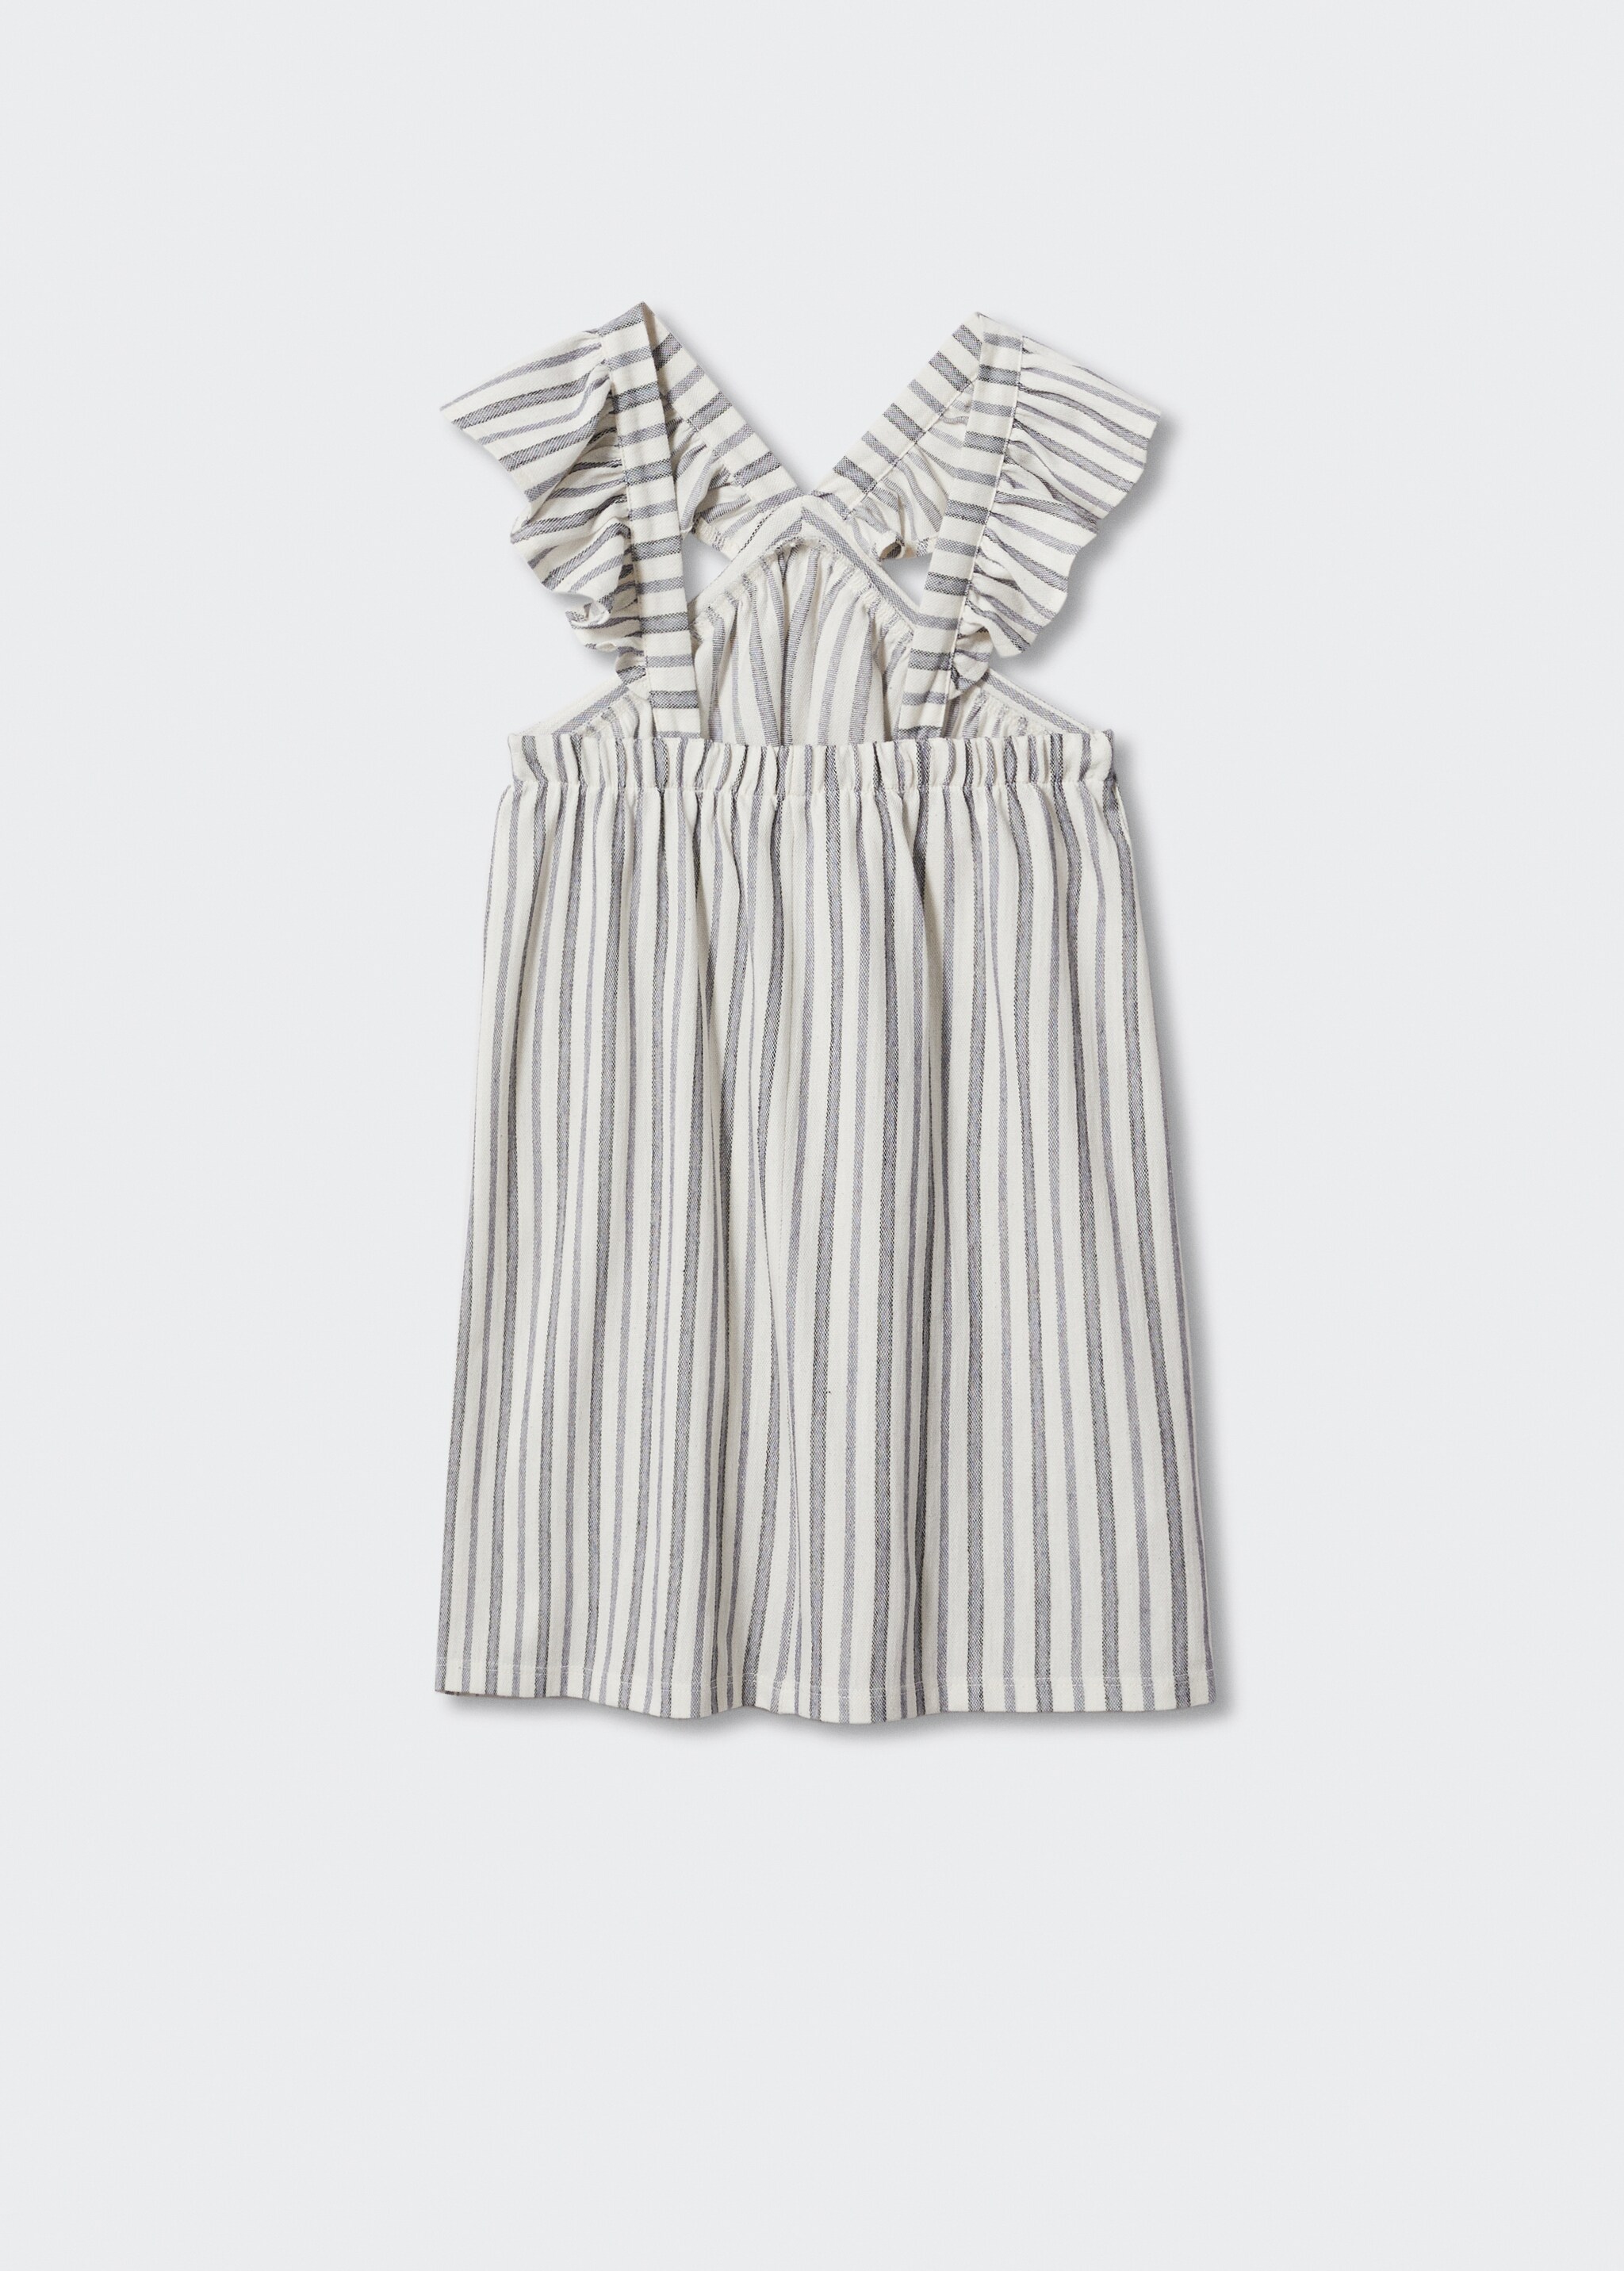 Striped dress - Reverse of the article